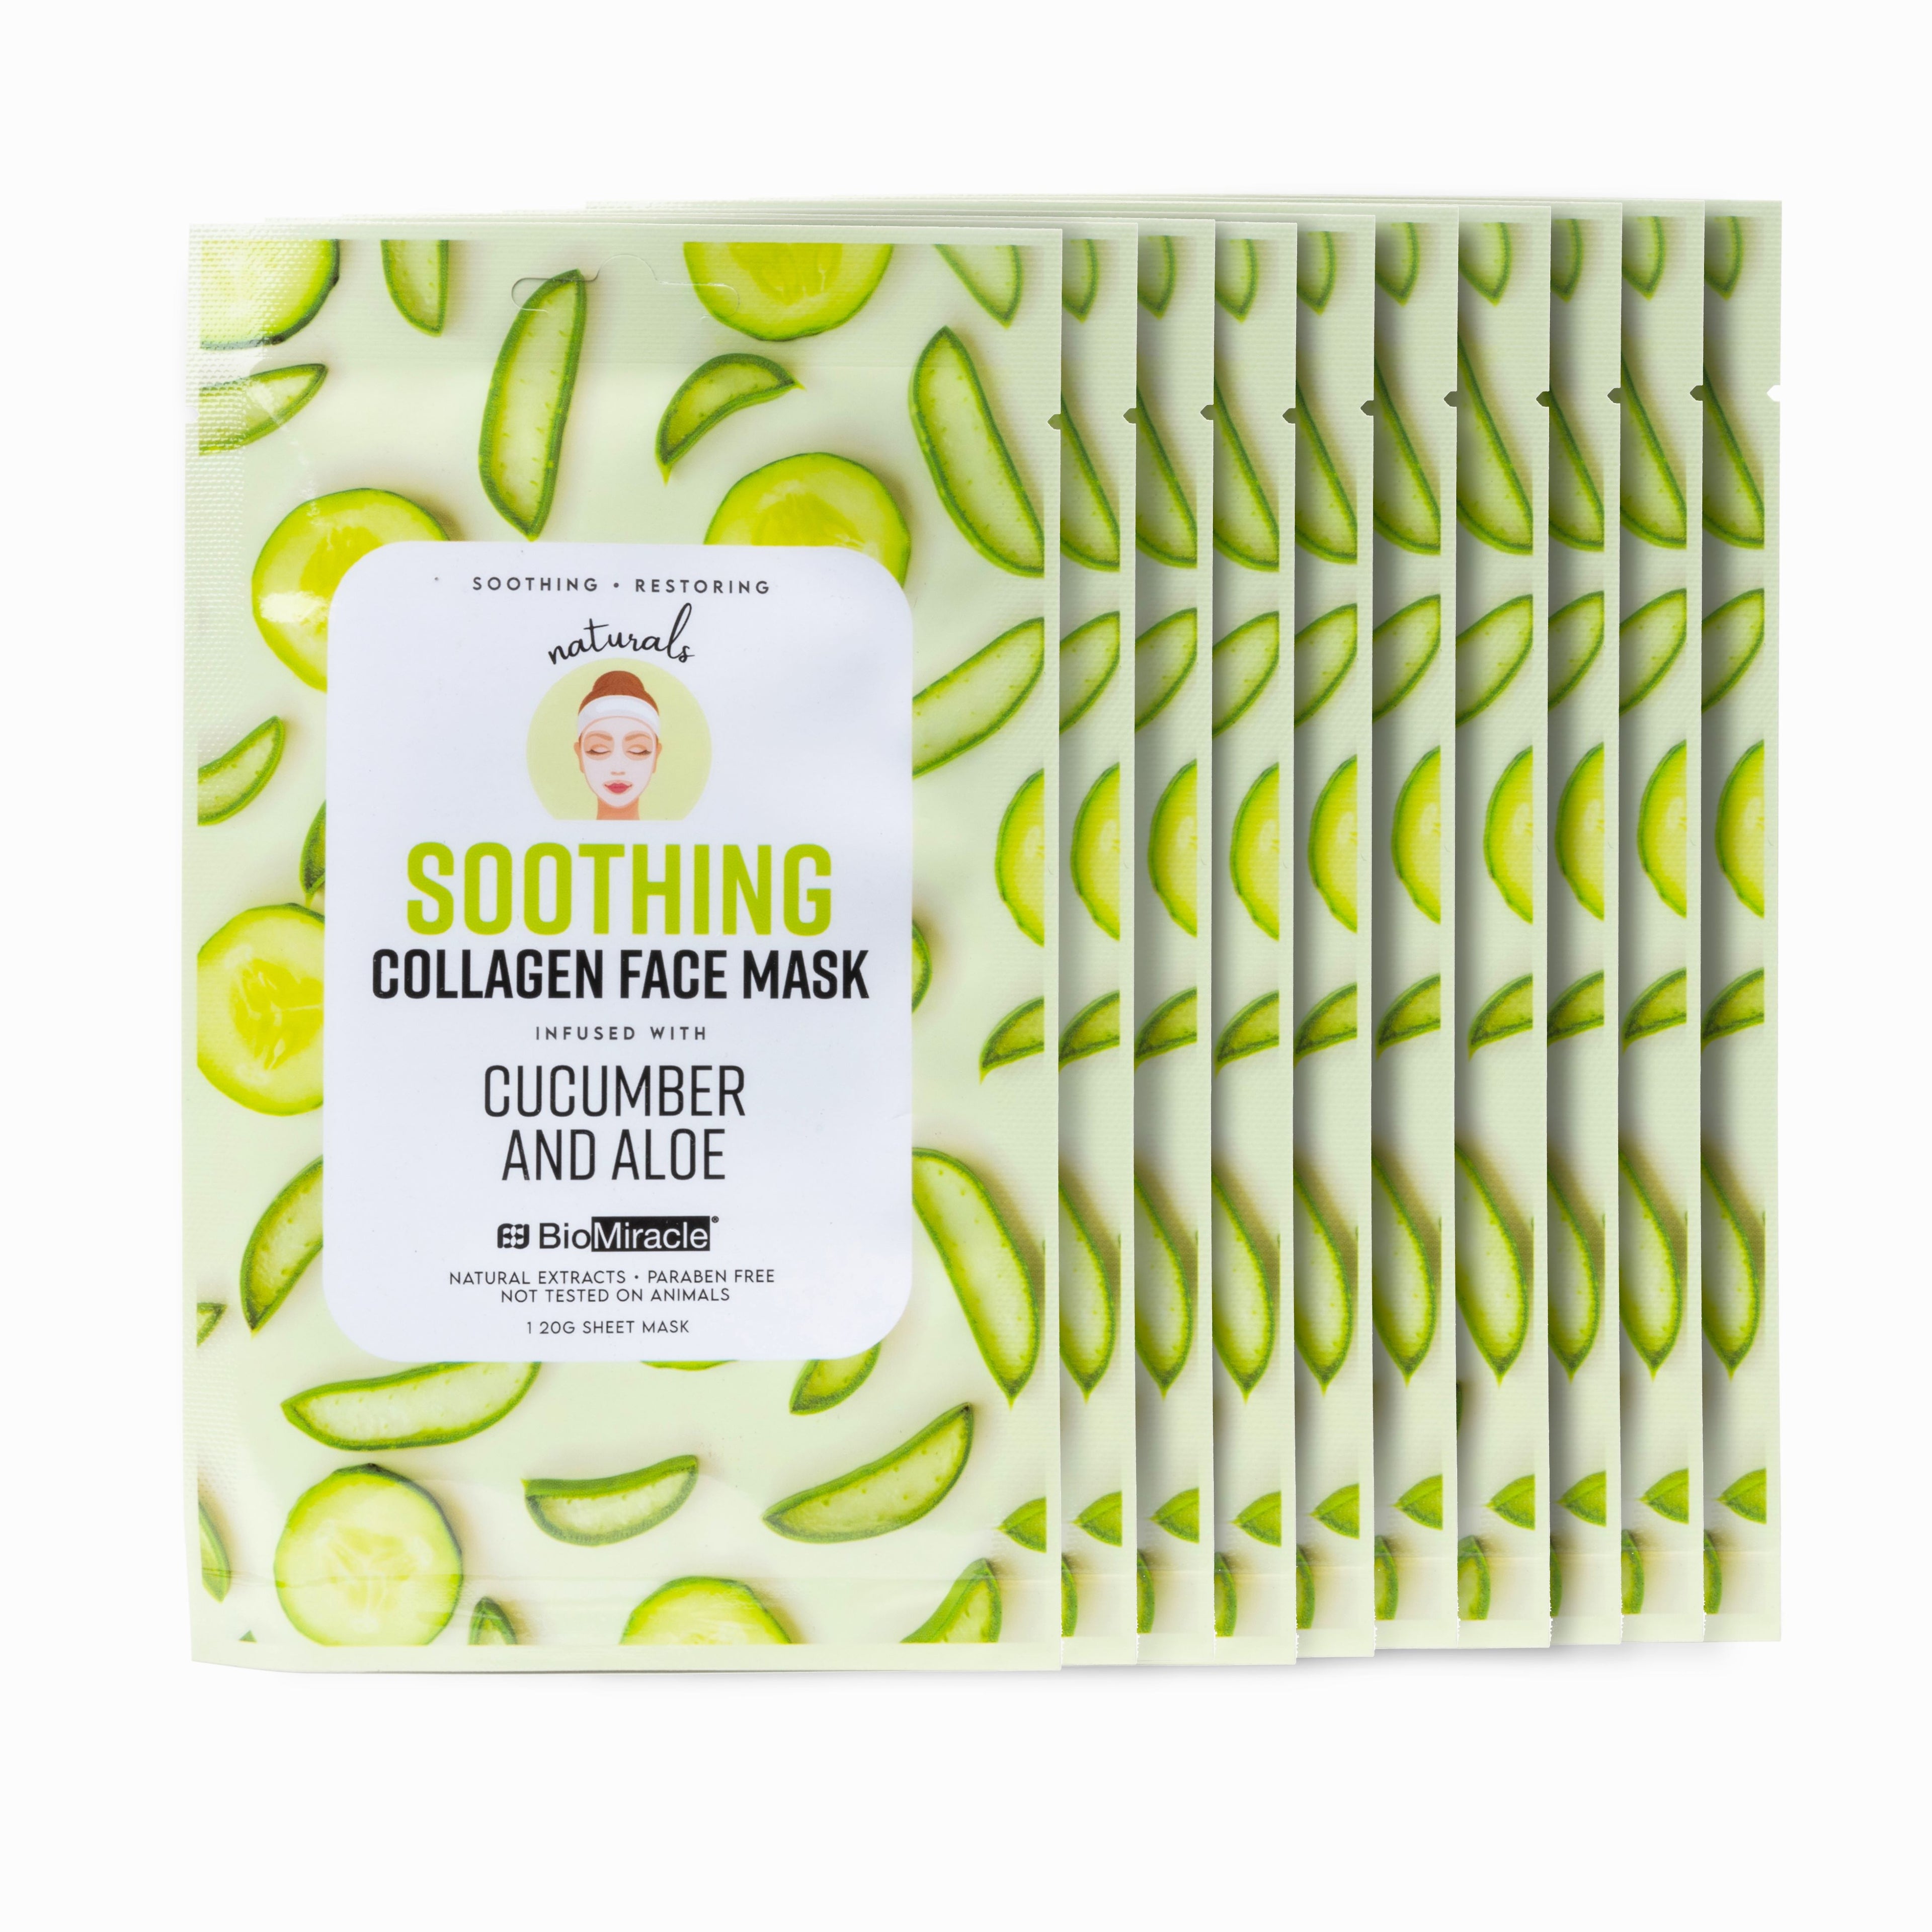 Soothing Collagen Face Mask Infused with Cucumber and Aloe- 10 Pack